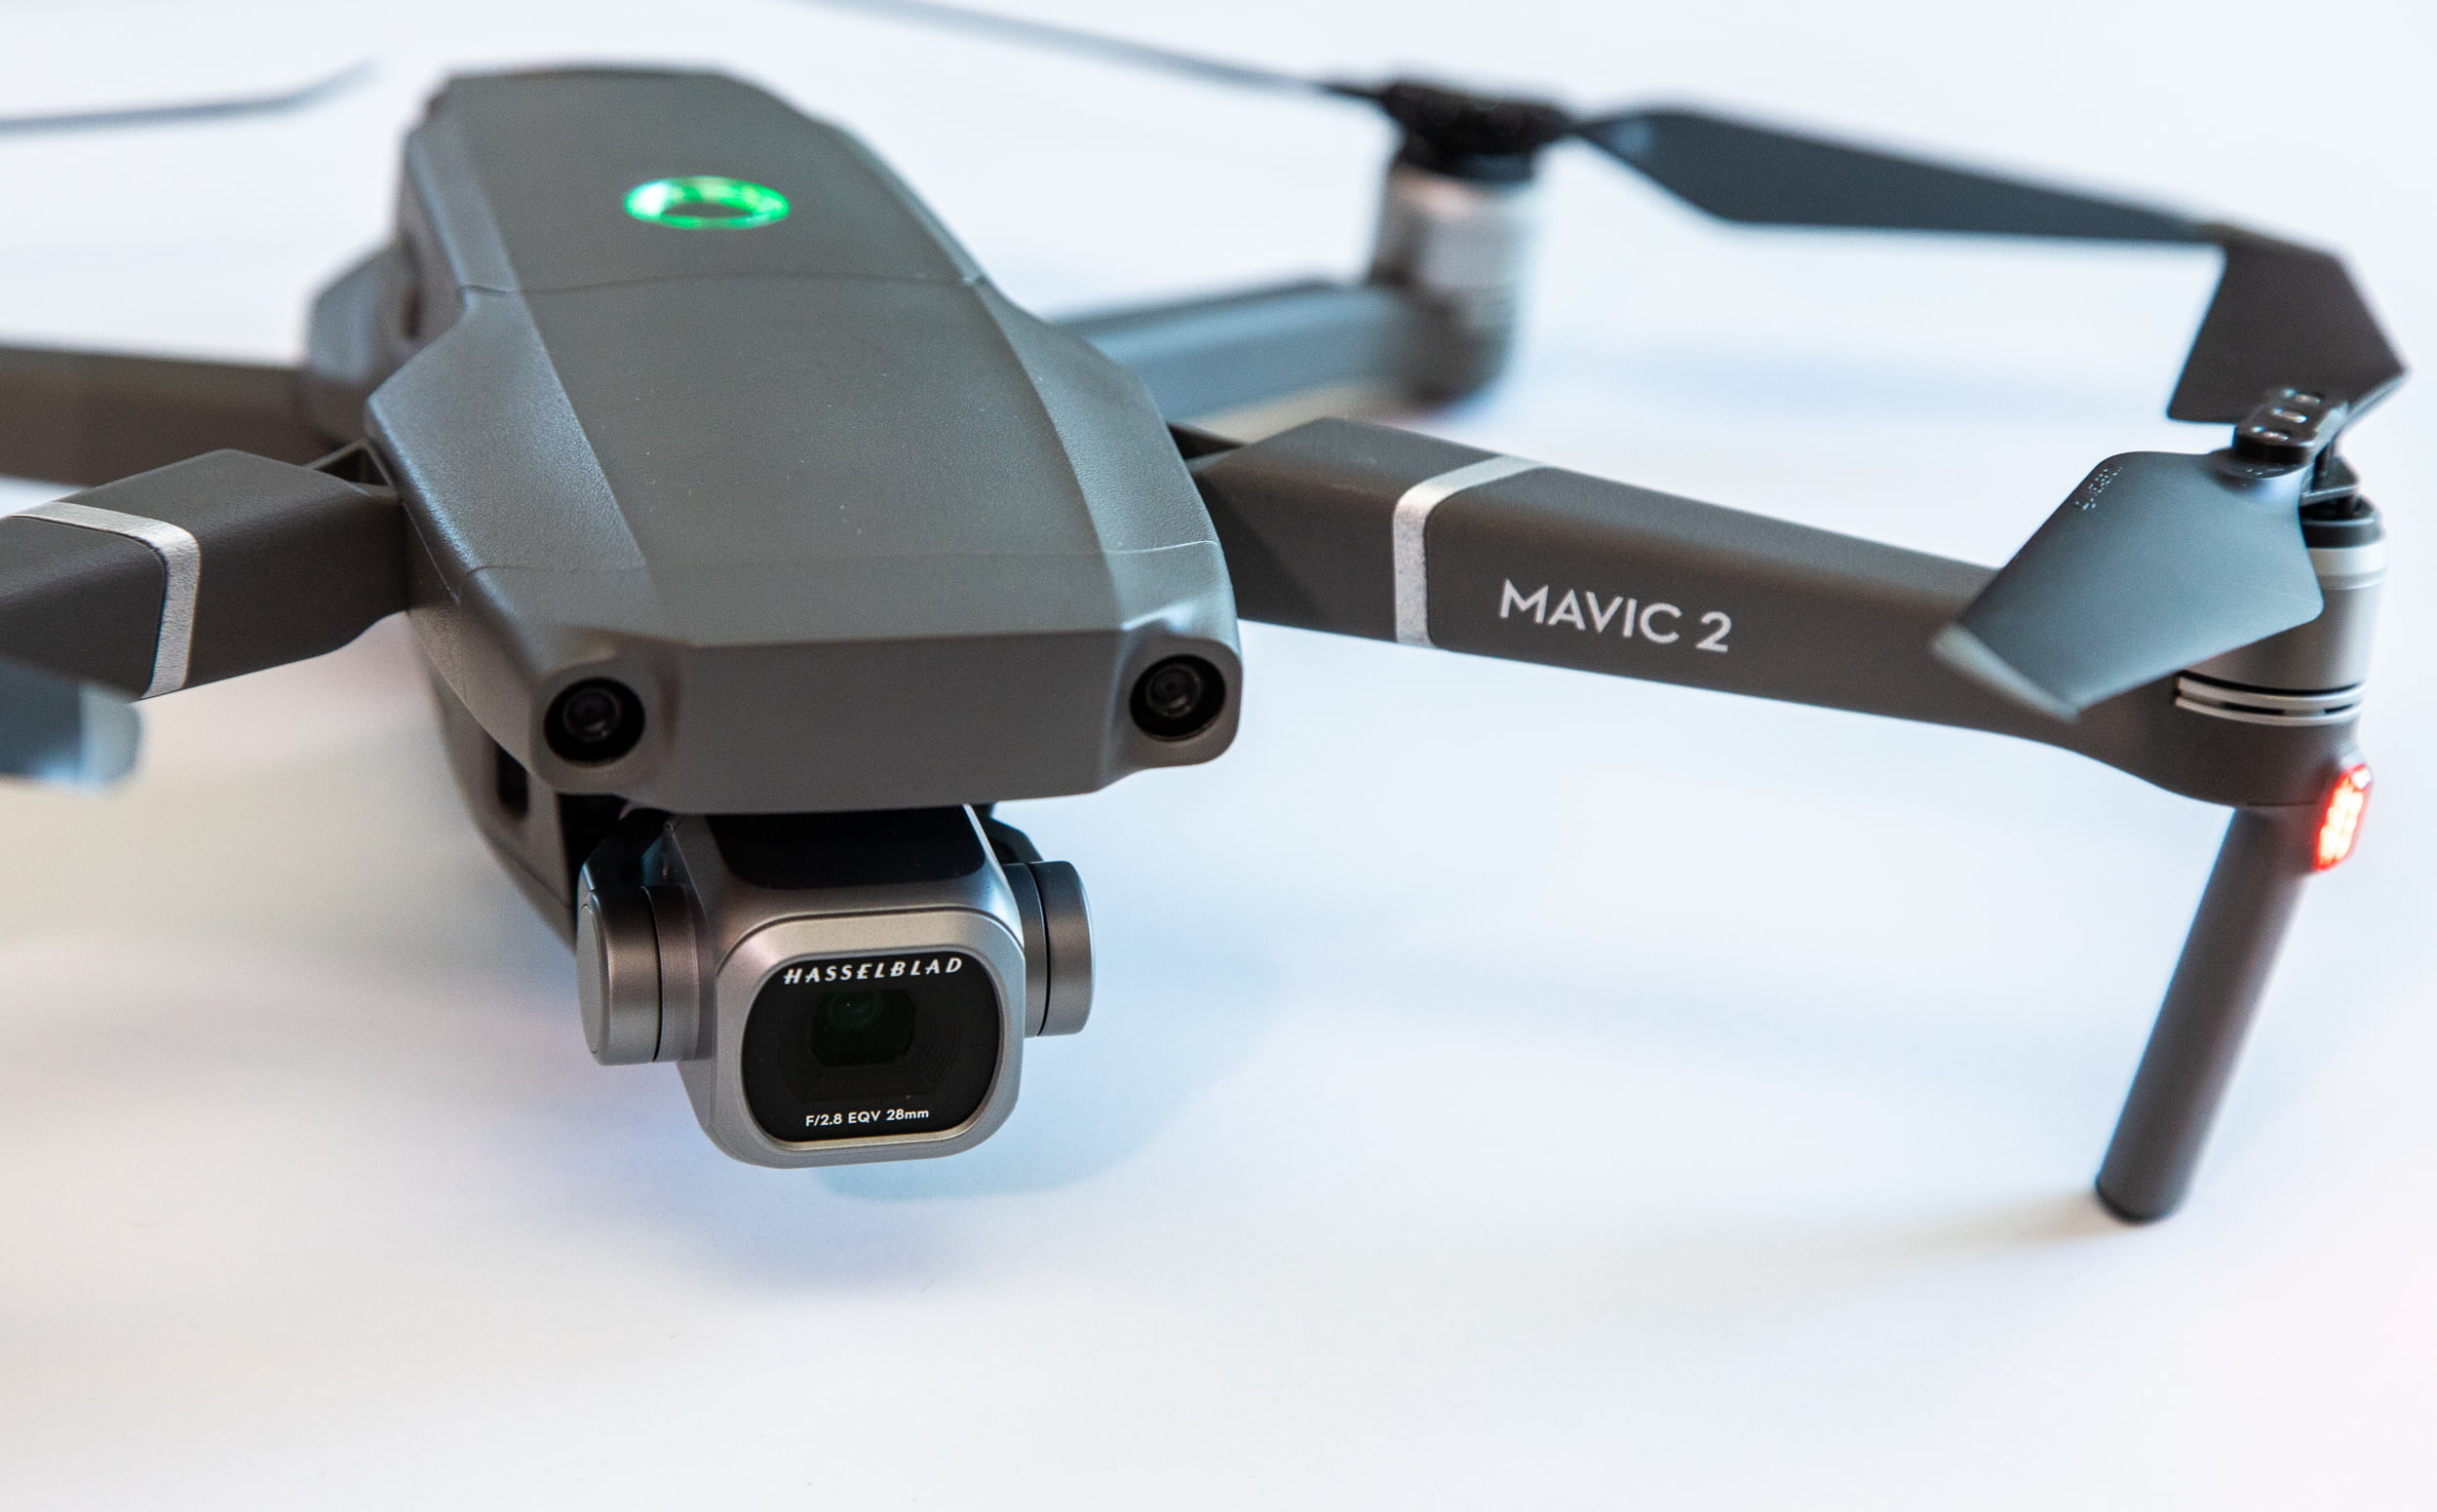 zoom Fragrant unstable Review: DJI Mavic 2 Pro with Hasselblad camera | The GATE